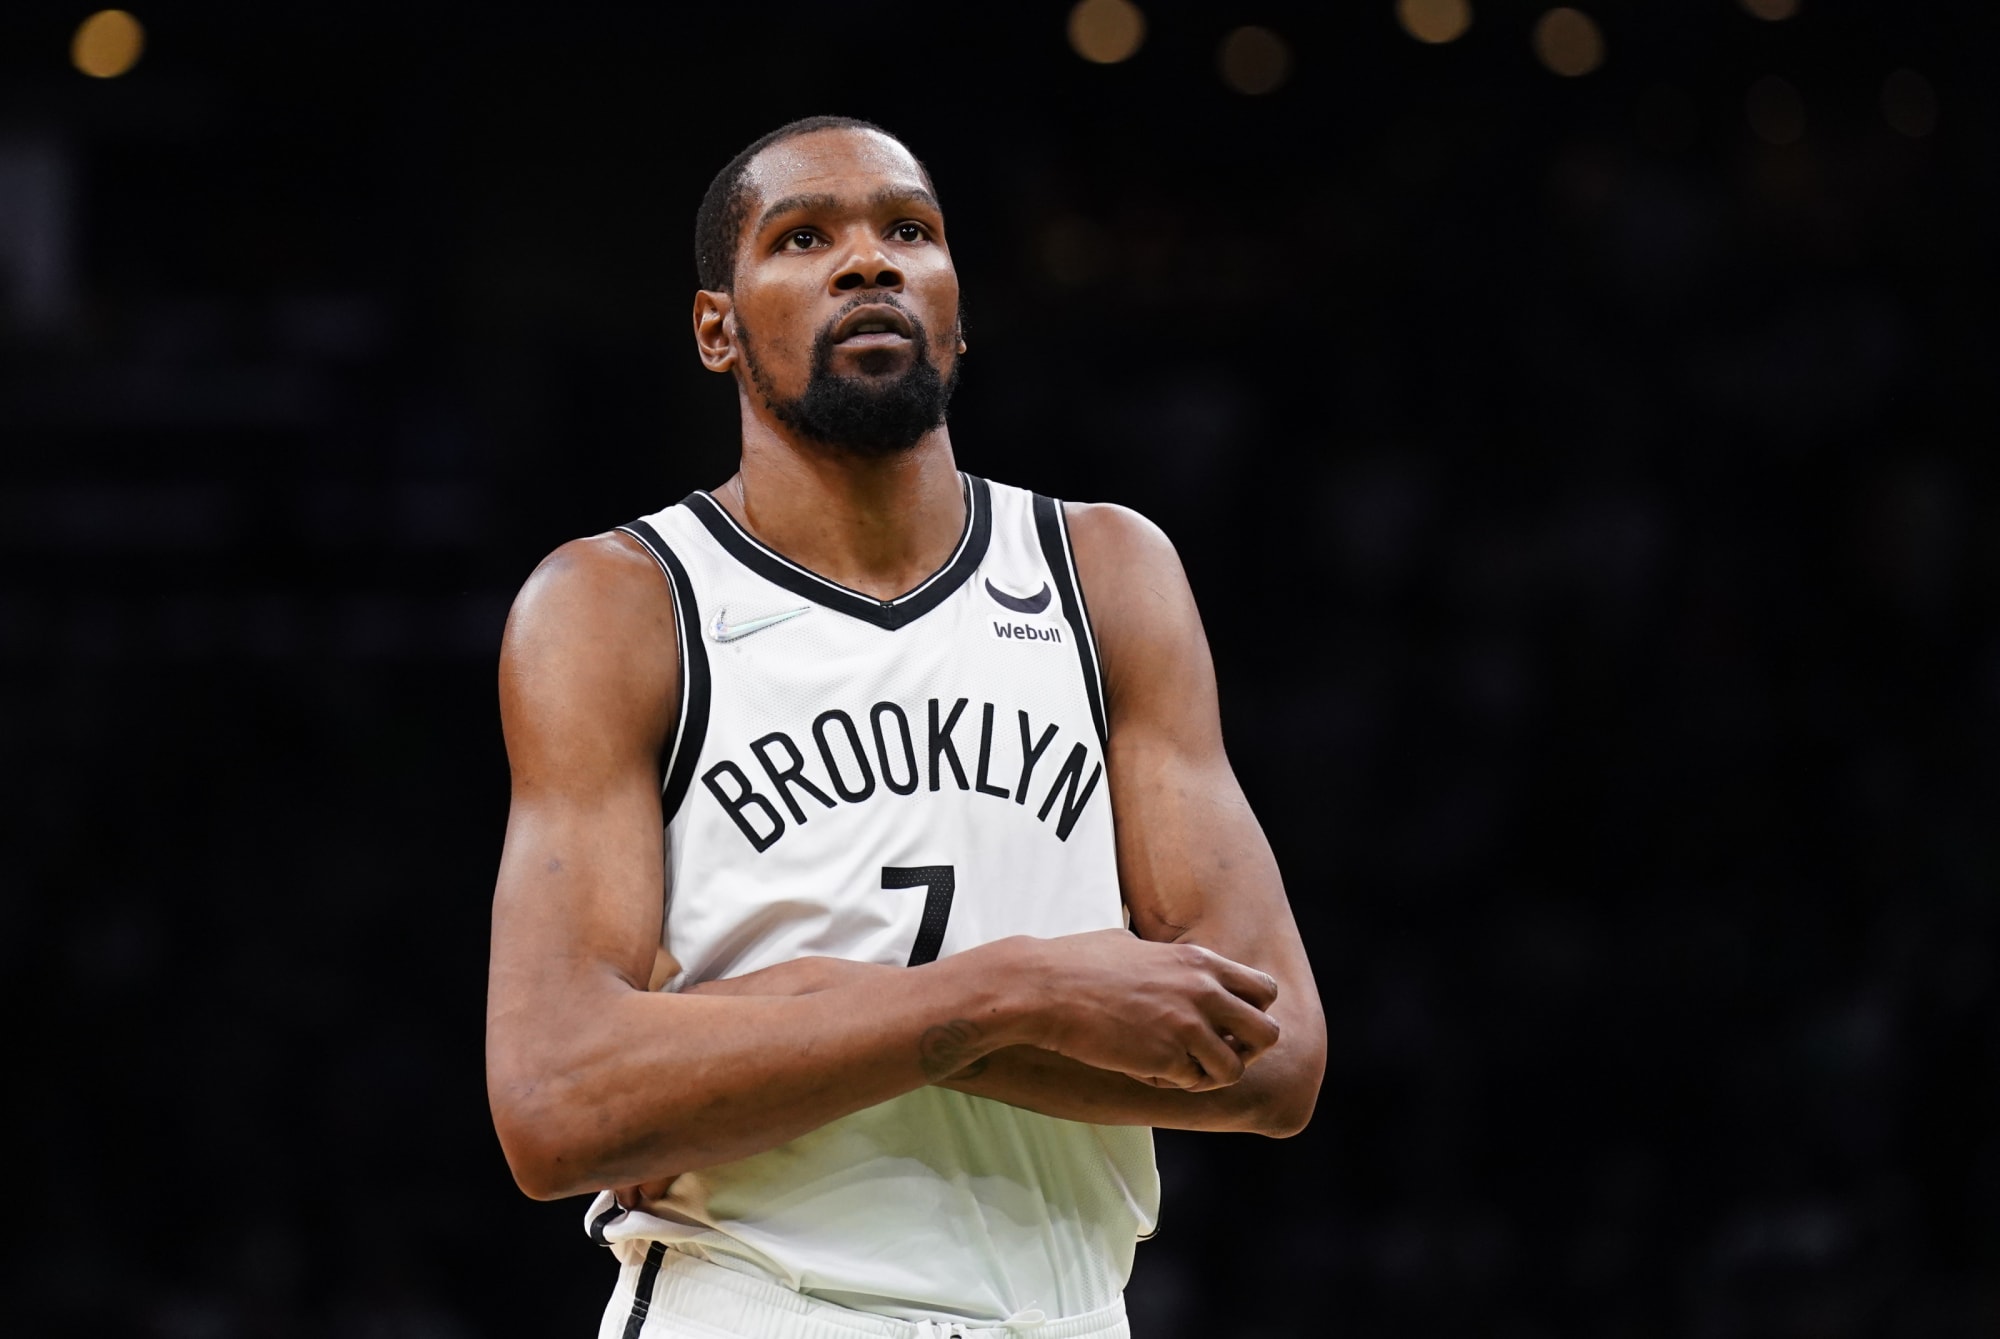 Trade Rumors: Is Kevin Durant using dirty tactics to escape Brooklyn Nets?